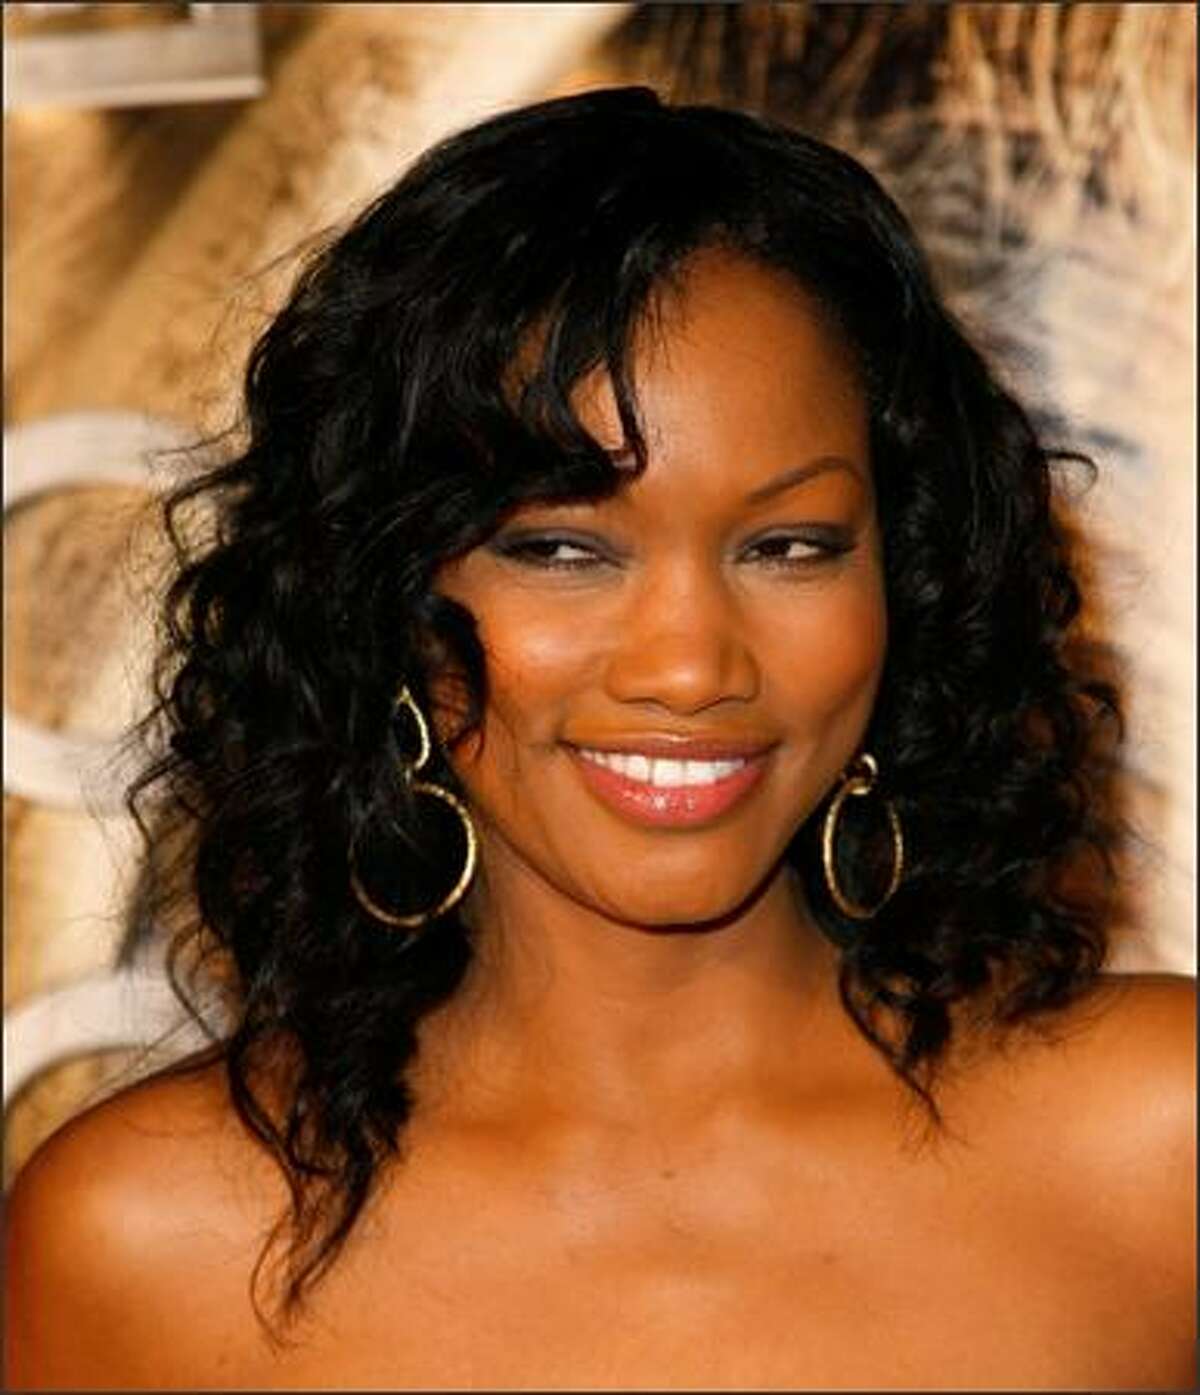 Actress Garcelle Beauvais arrives at the premiere of "10,000 B.C."